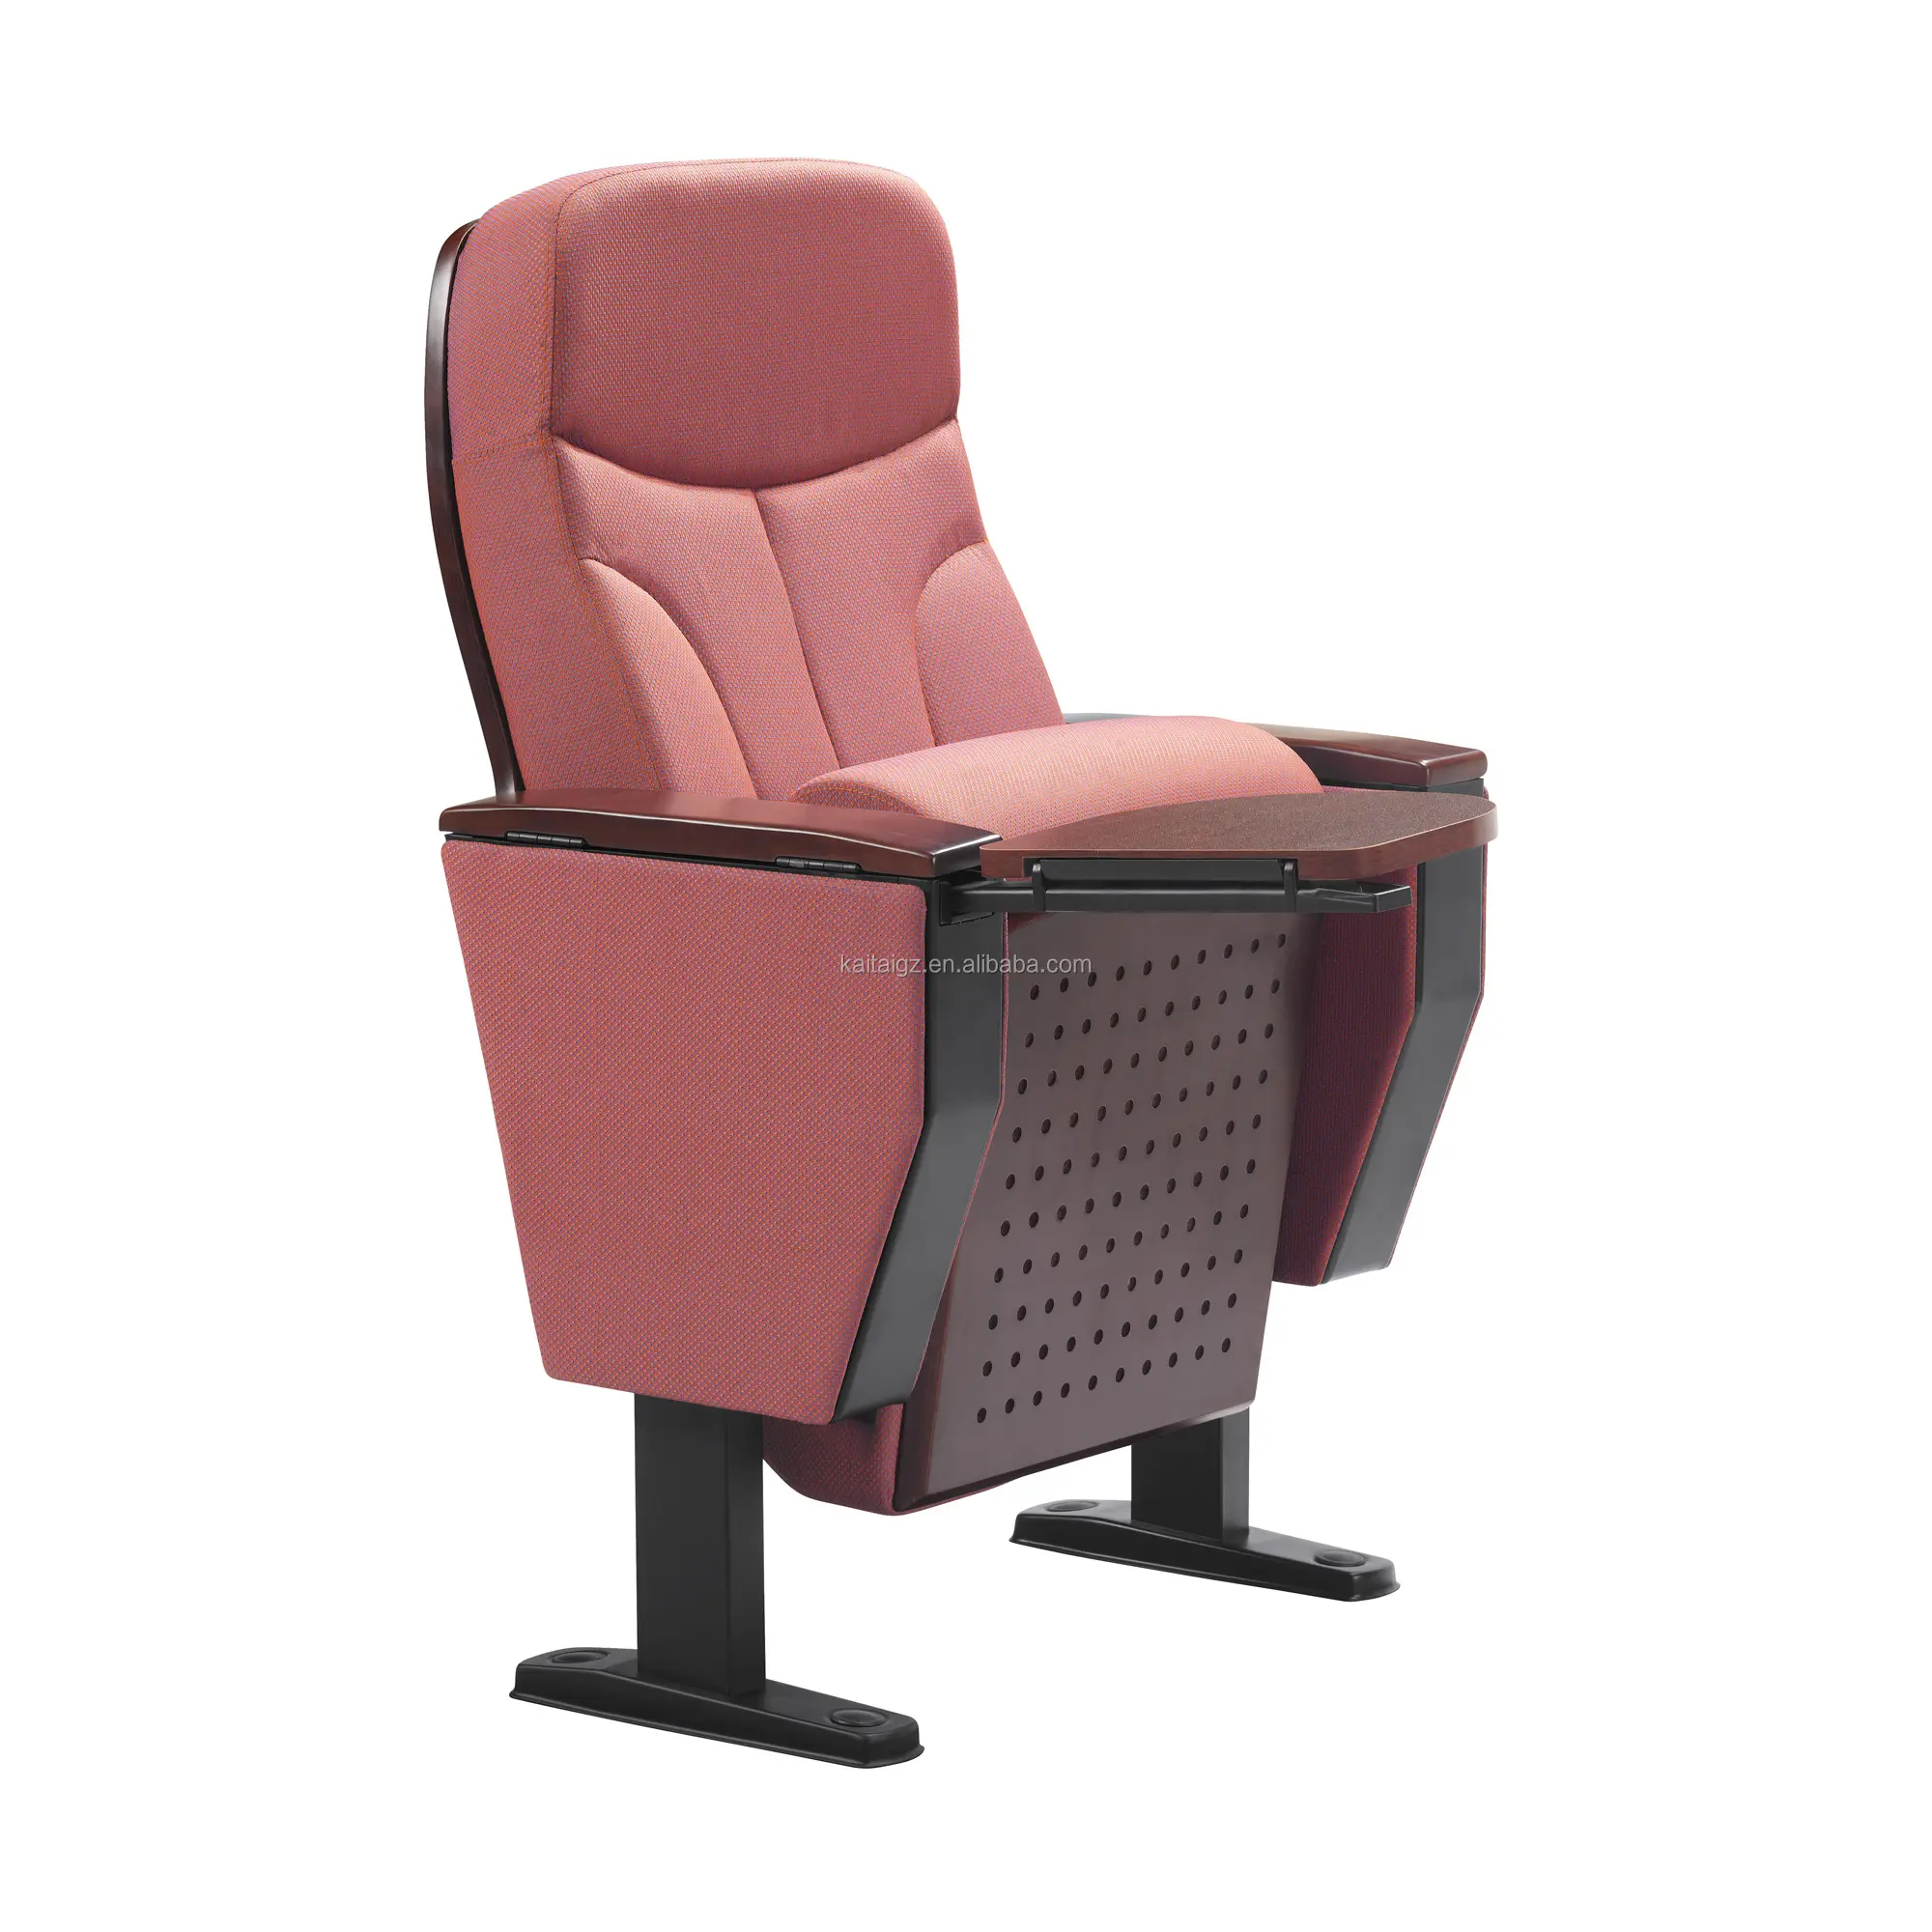 Hot selling theater auditorium chair cinema chair with writing pad